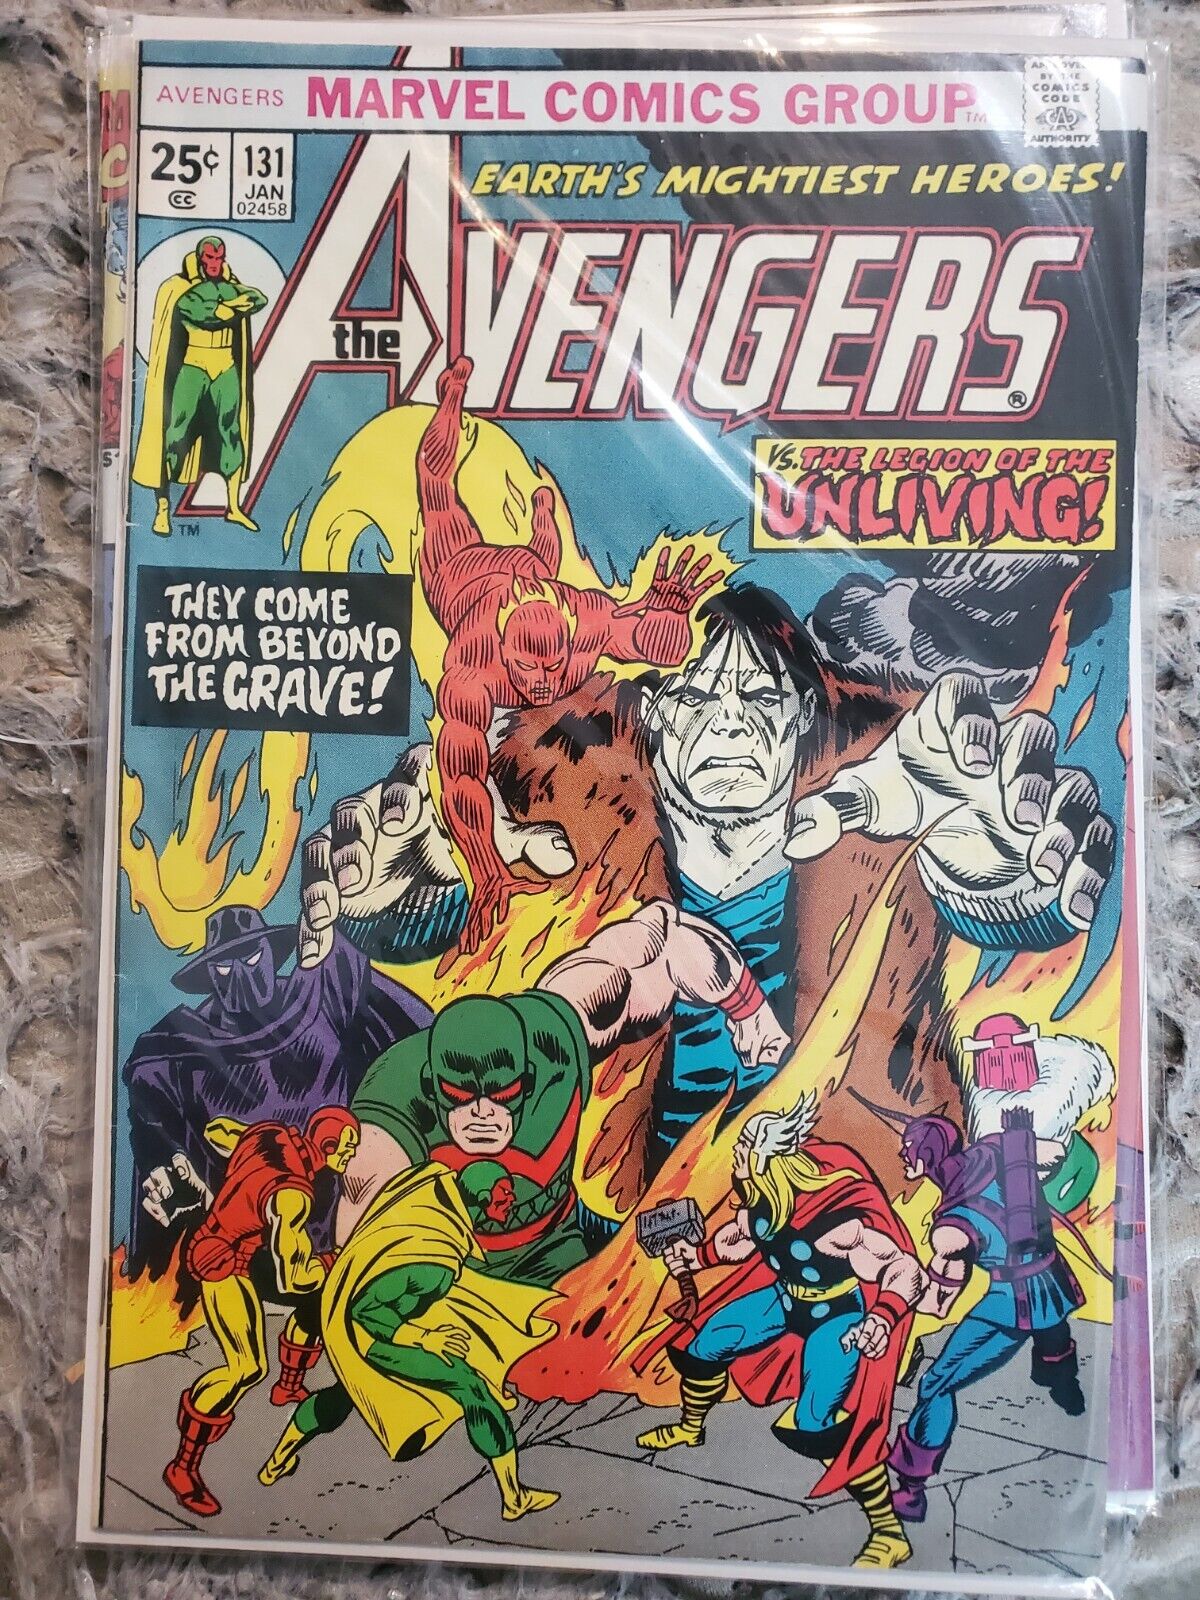 AVENGERS #131 LEGION OF THE UNLIVING 1ST APPEARANCE *1975* 8.0